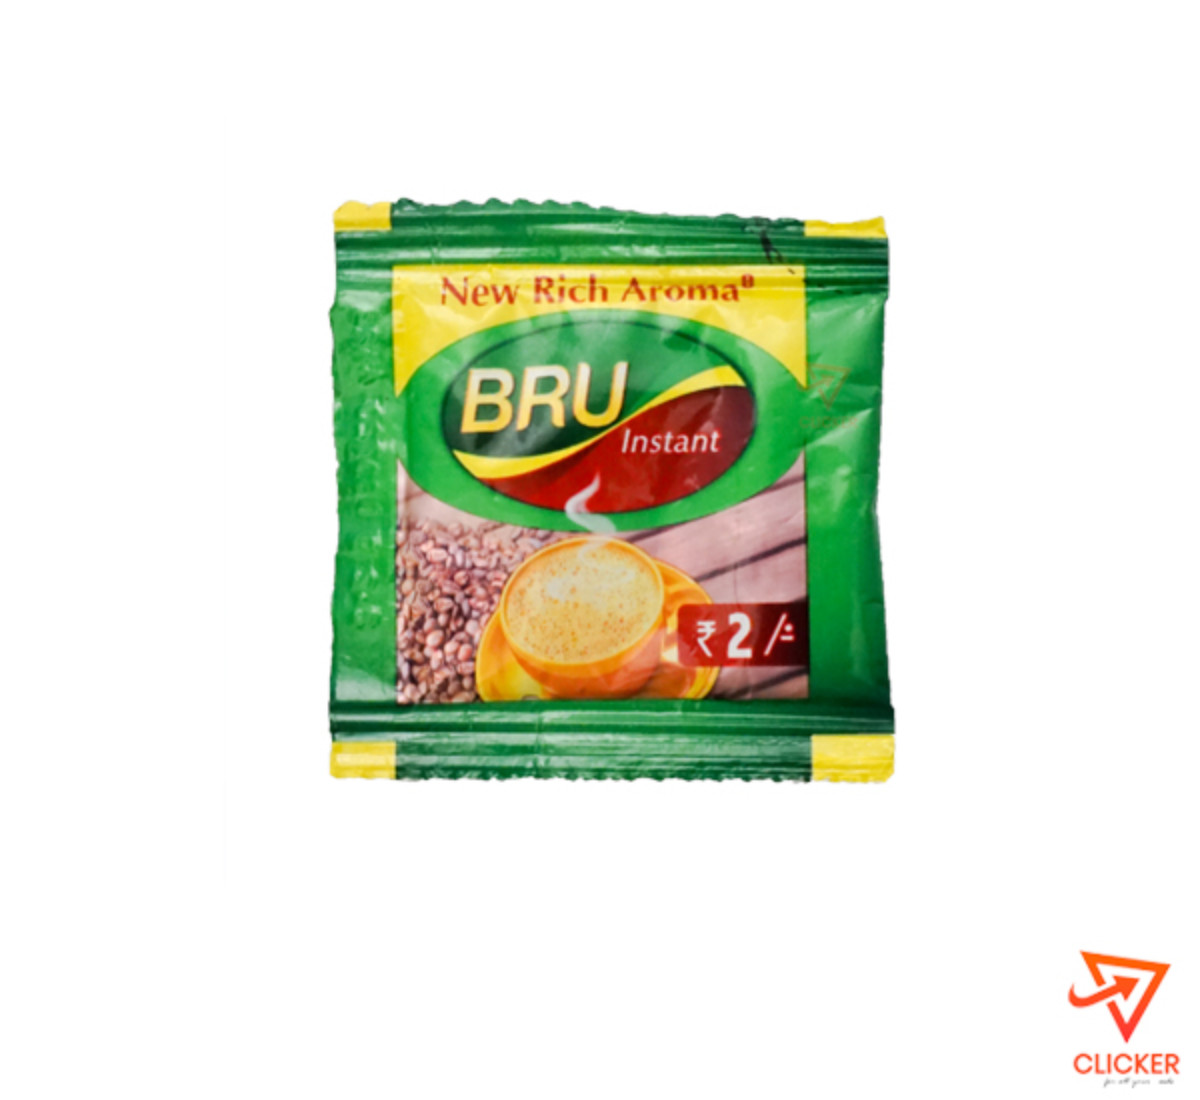 Clicker product BRU instant new rich aroma 988